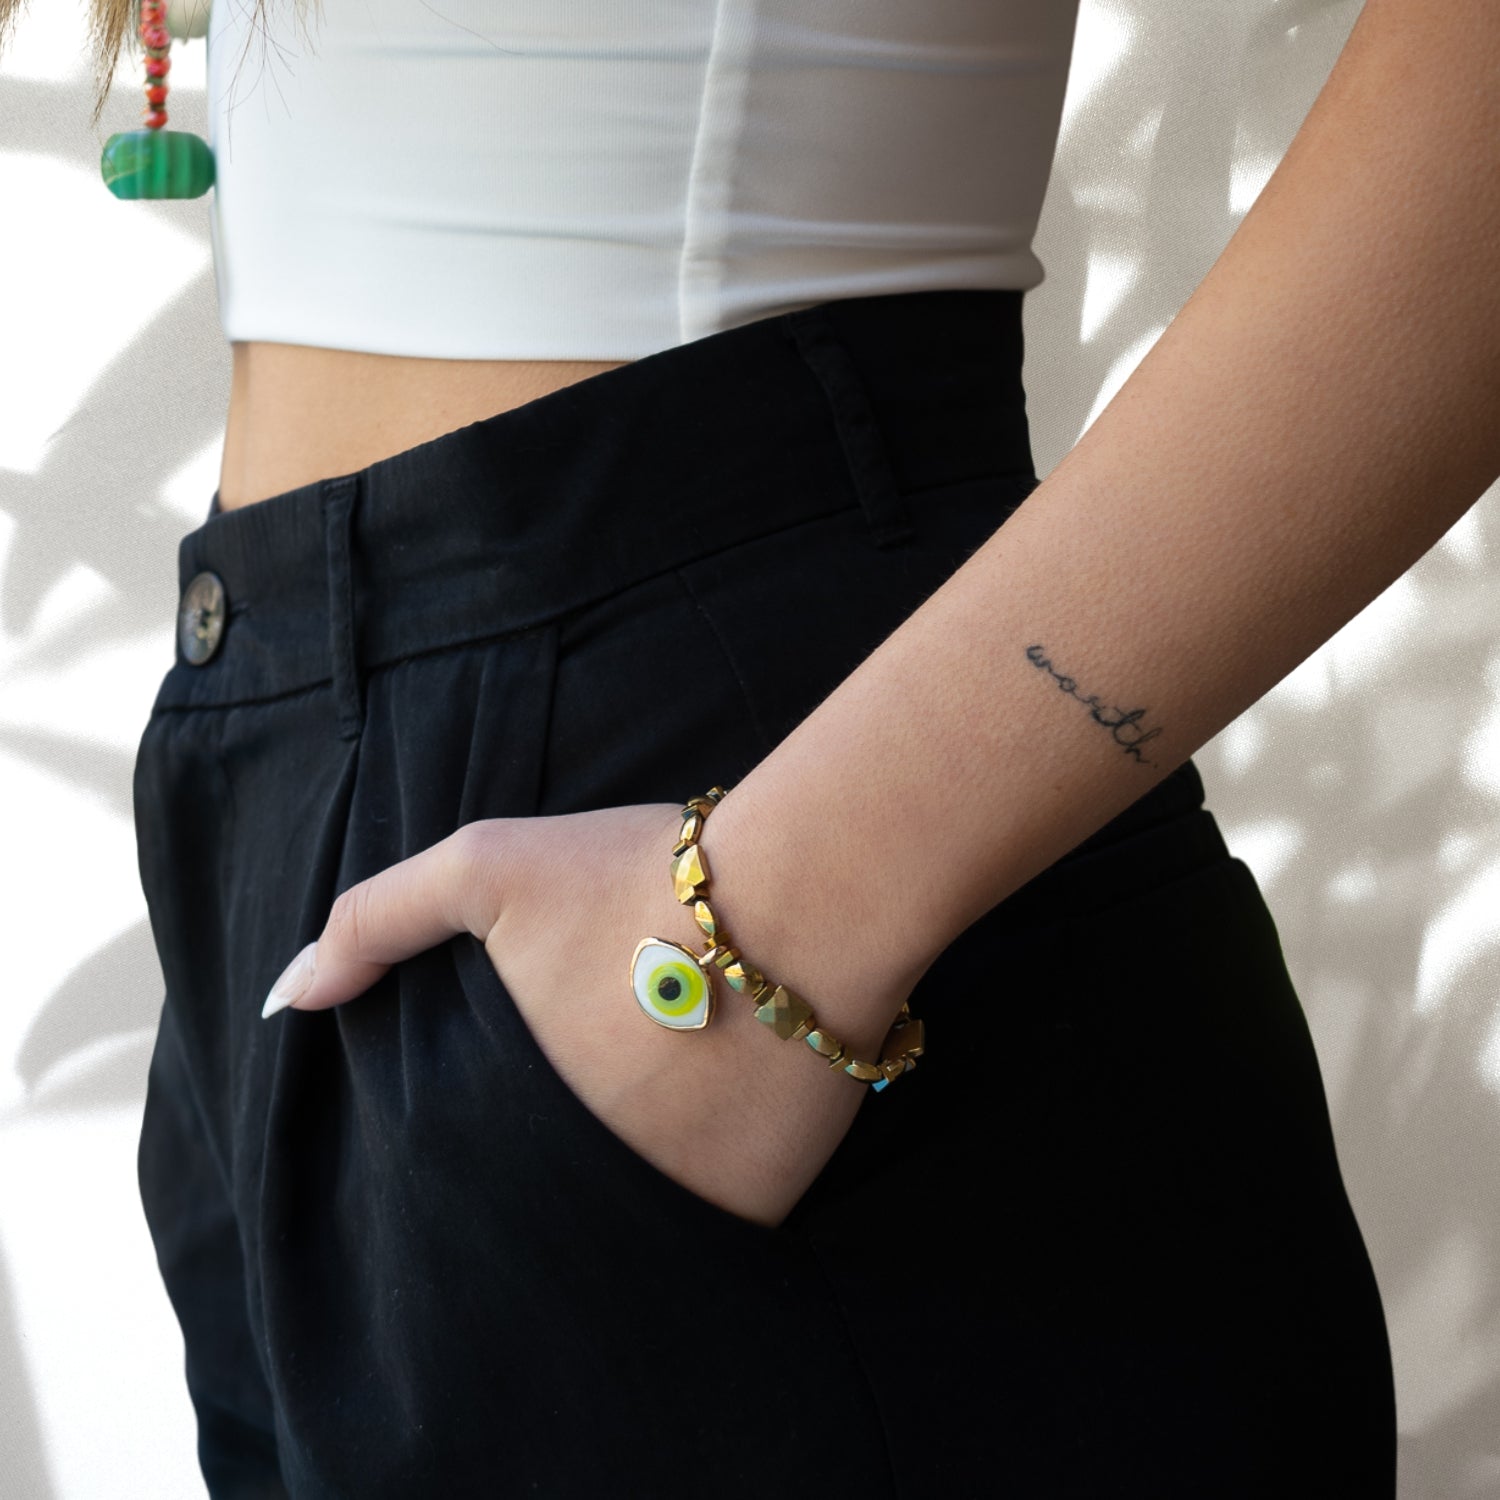 A hand model wearing the Green Eye Vitality Bracelet, showcasing its stunning design and vibrant green Evil eye charm. The bracelet adds a stylish touch to the model&#39;s wrist, exuding elegance and positive energy.